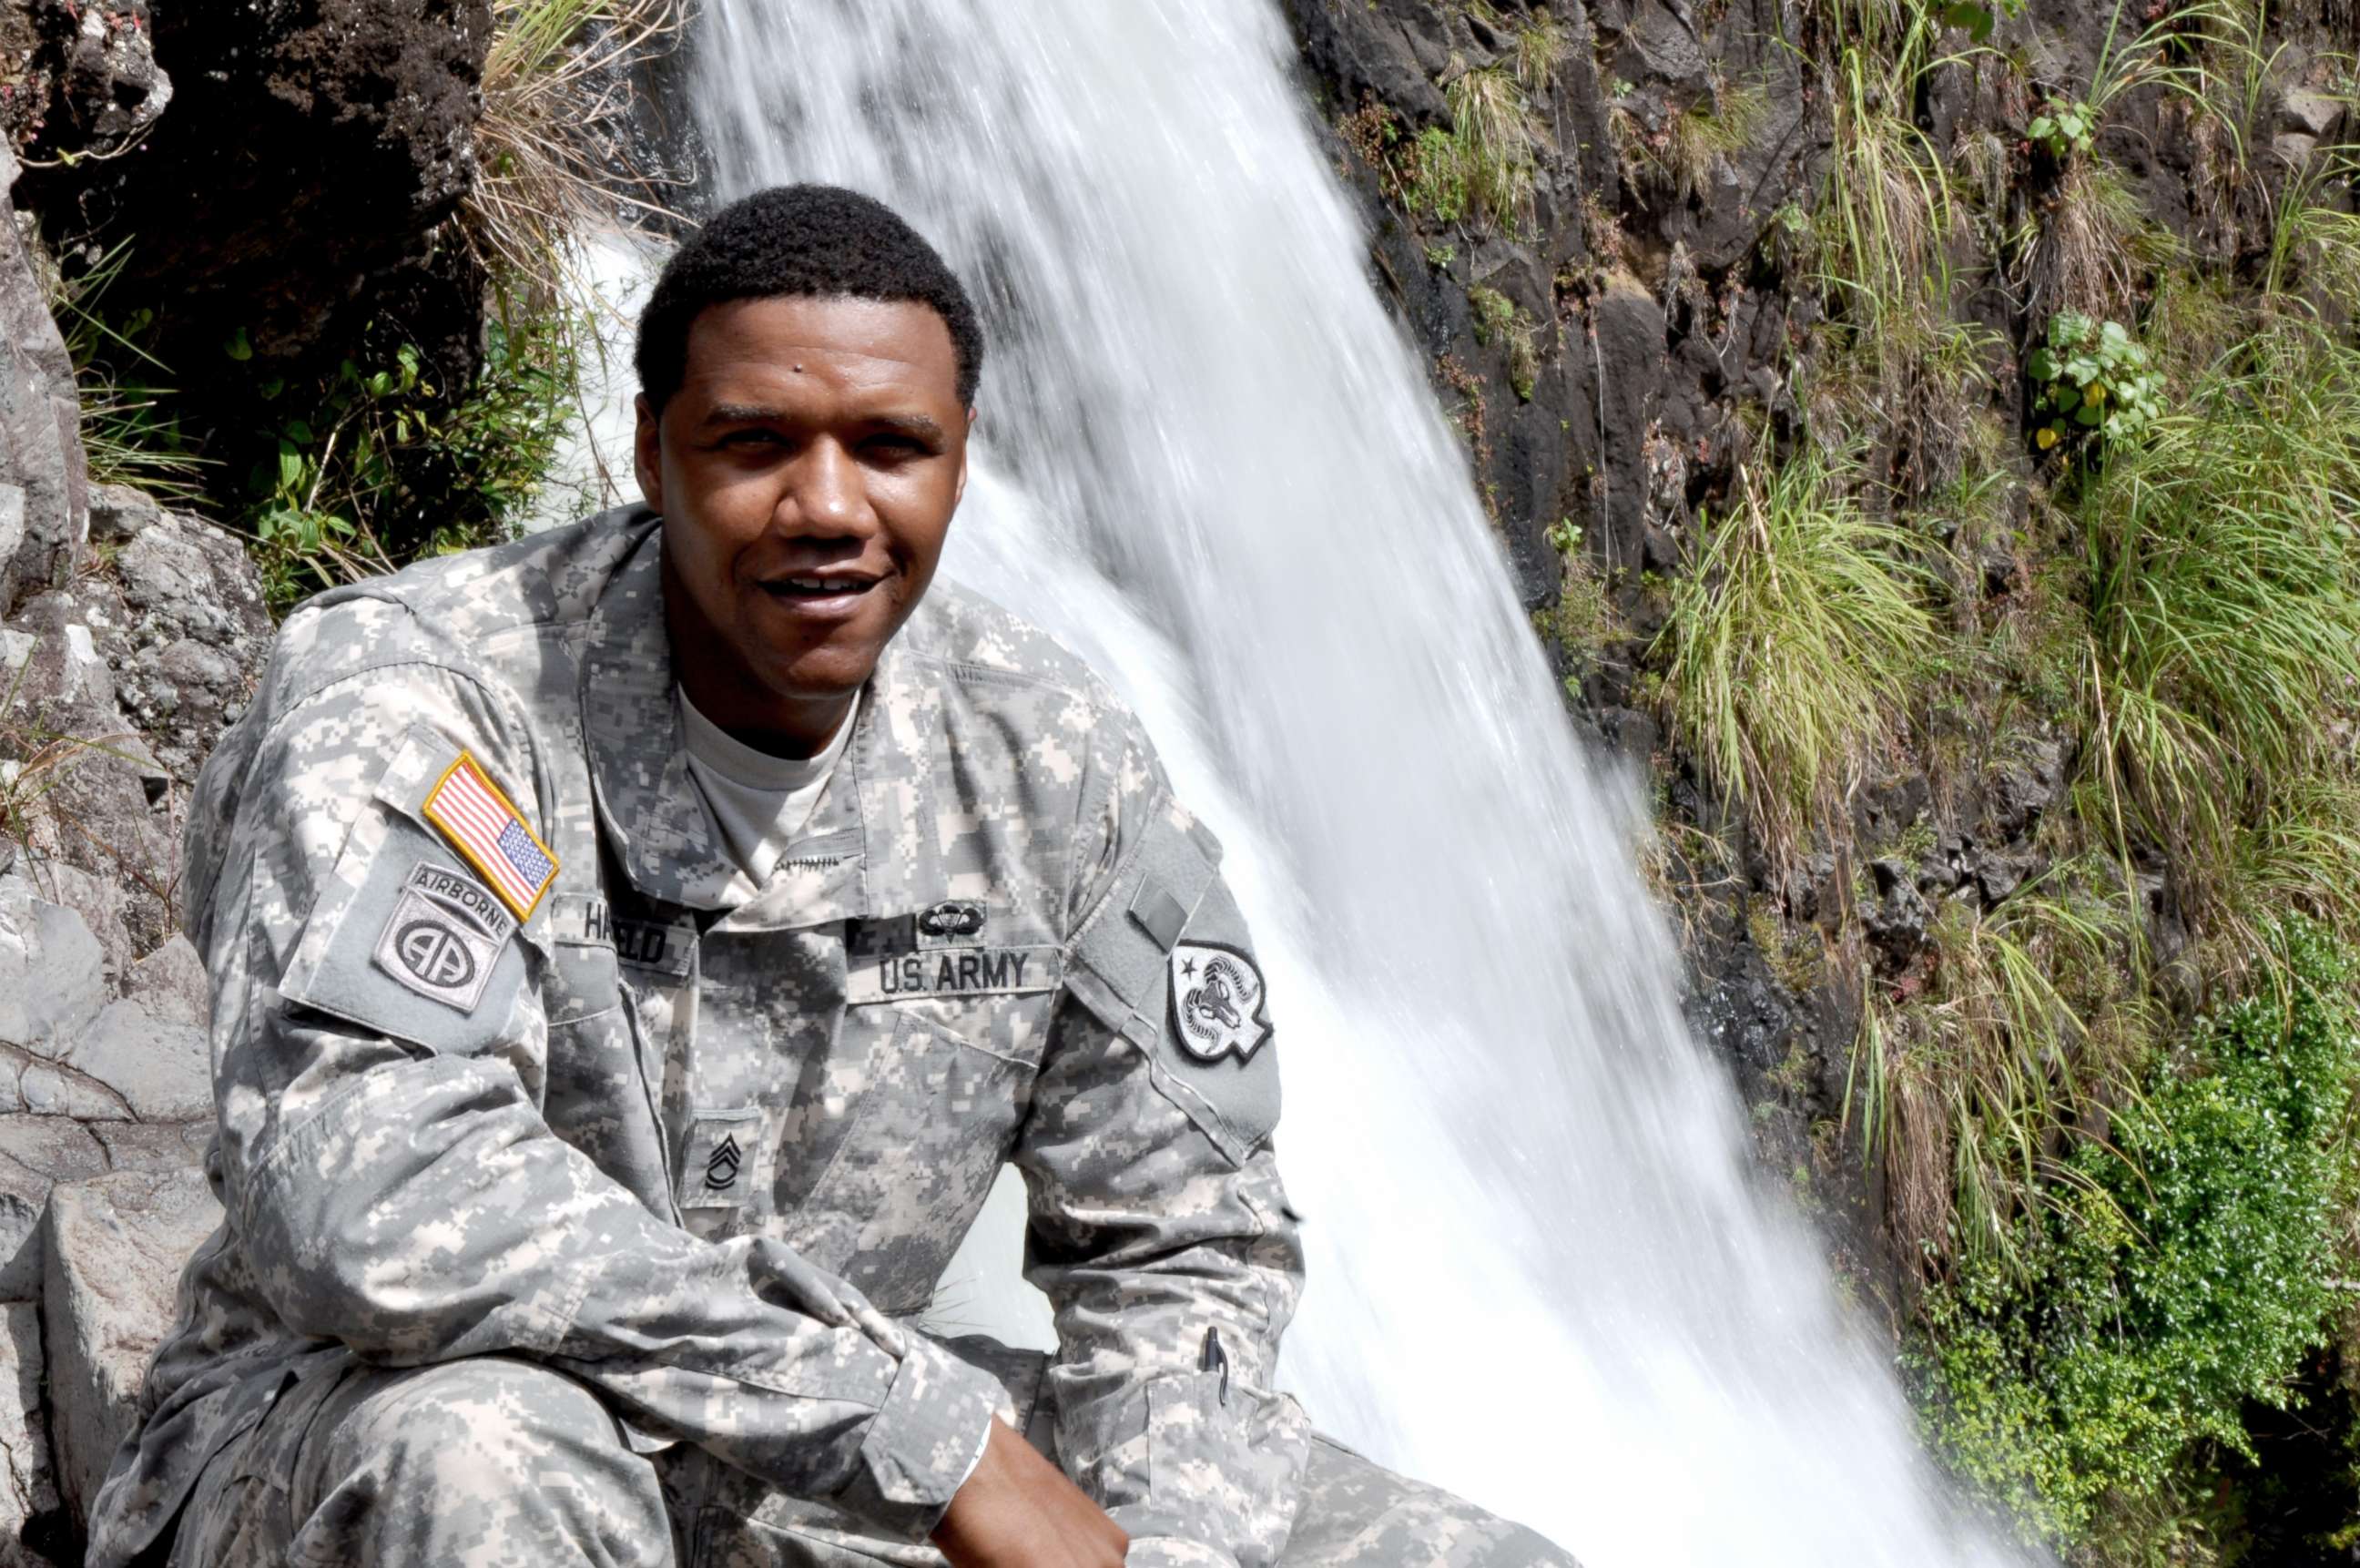 PHOTO: Sgt. 1st Class Charleston Hartfield of the Nevada Army National Guard was one of the people killed in Las Vegas after a gunman opened fire, Oct. 1, 2017, at a country music festival.